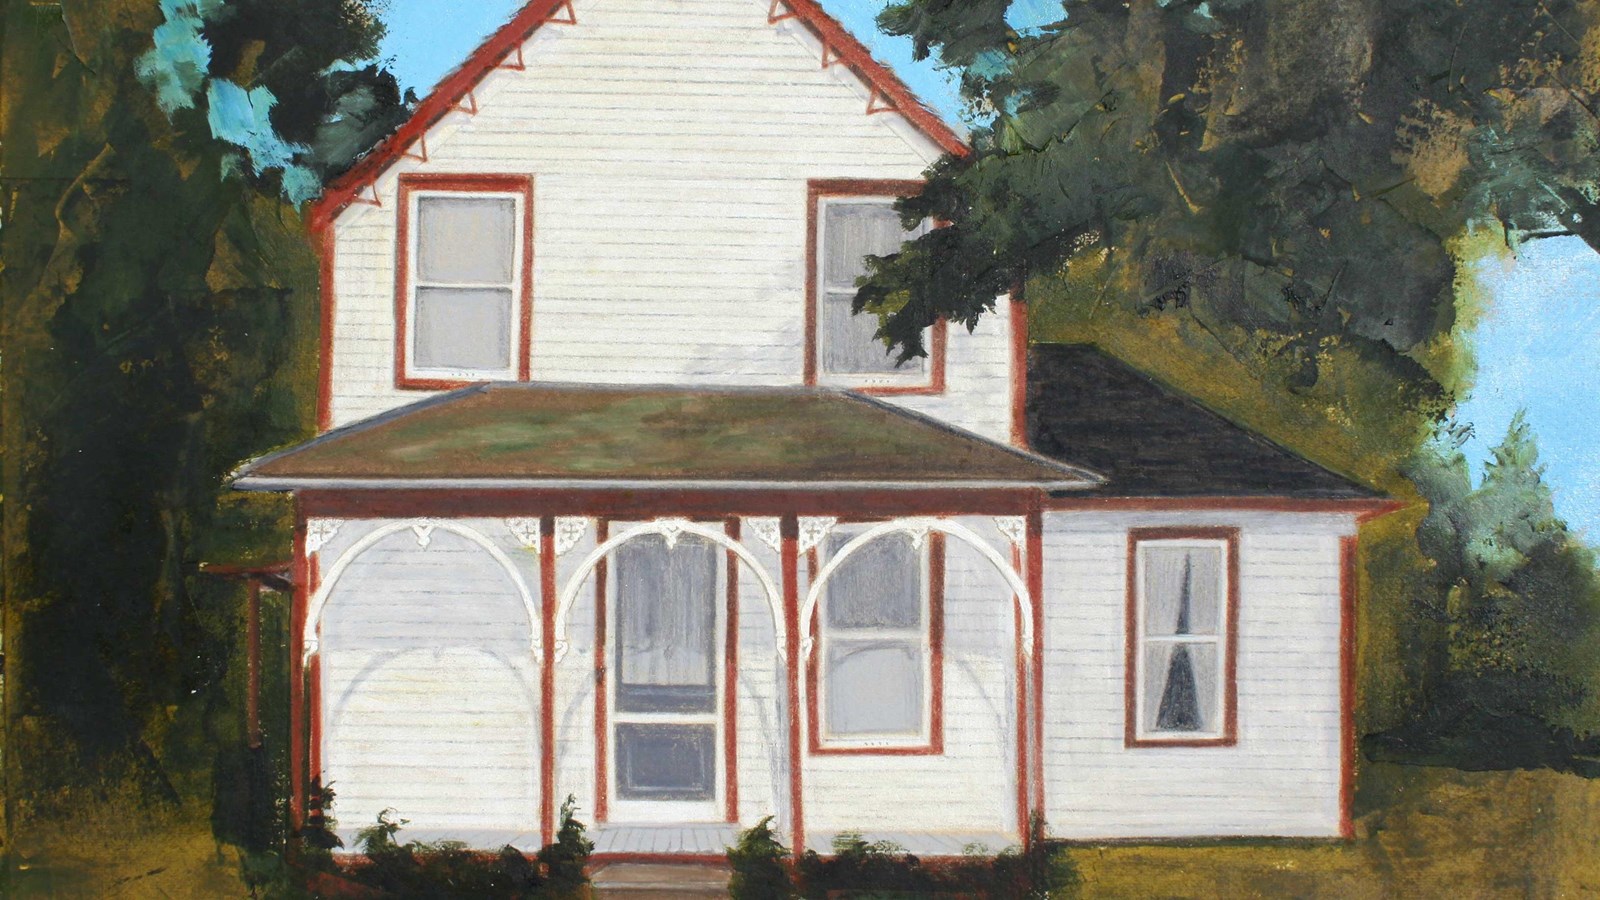 A painting depicts a yellow two story house has brown trim and Carpenter Gothic gingerbread.